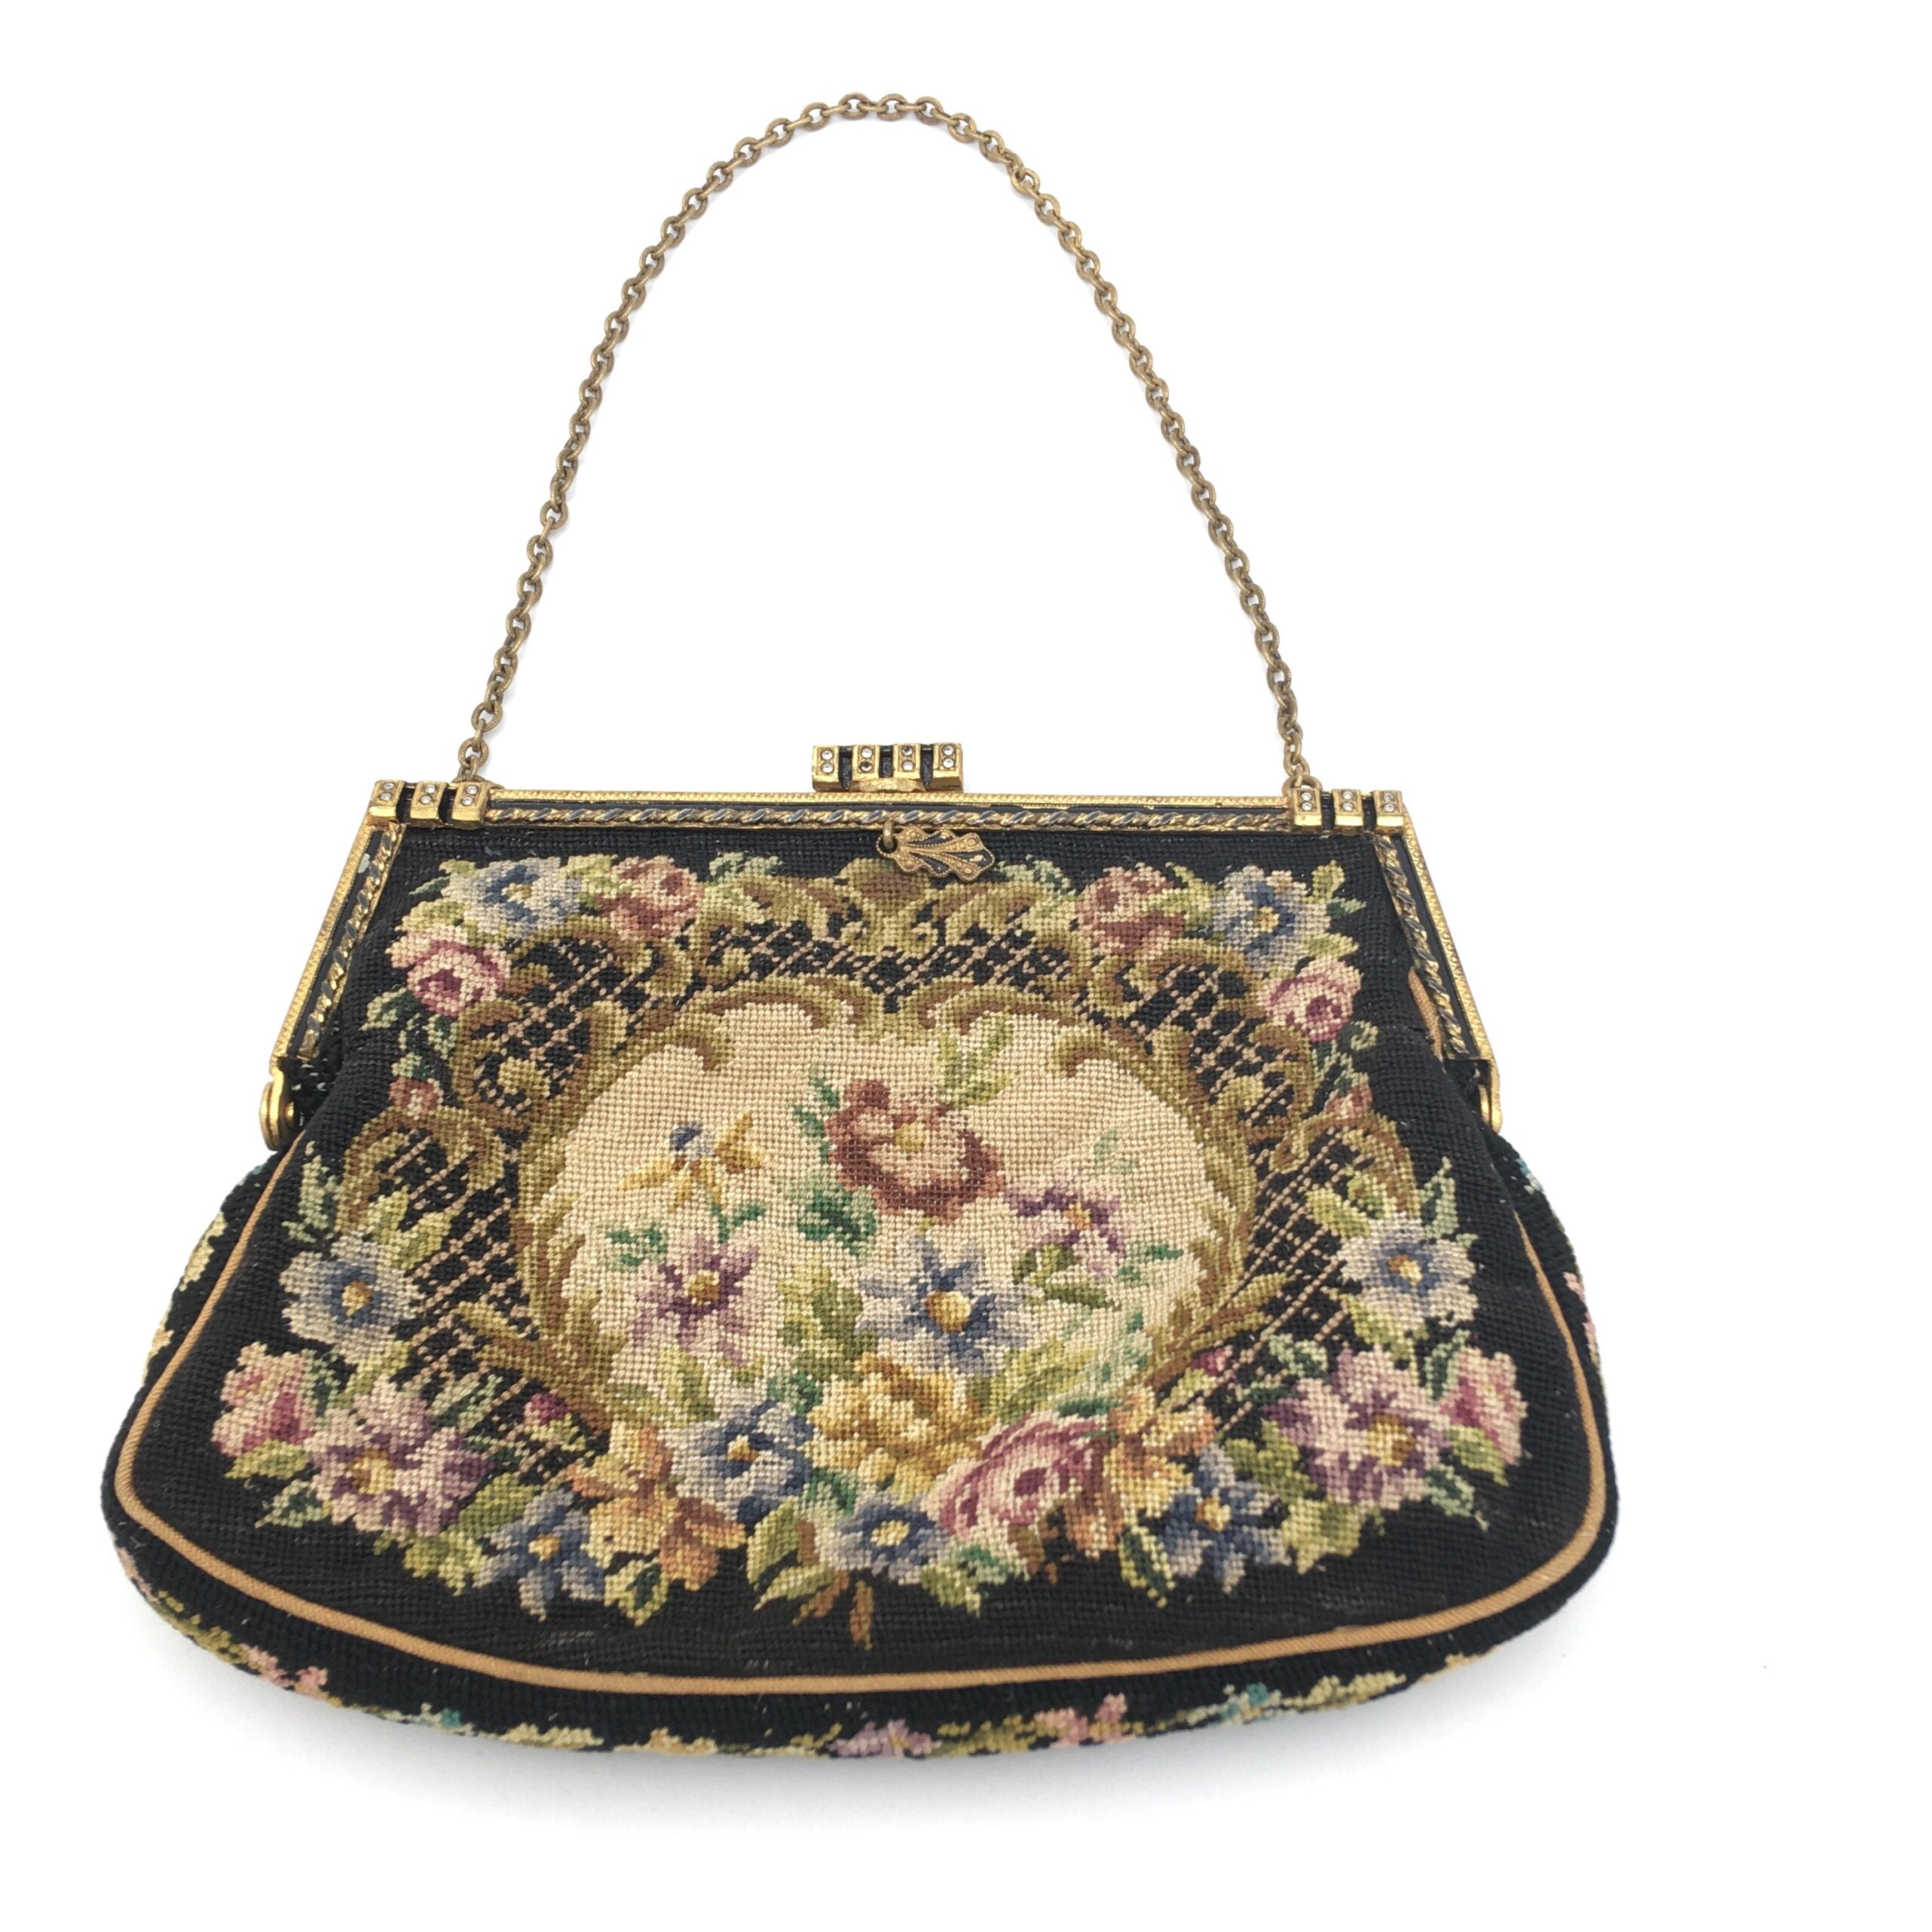 Gilt and Floral Needlepoint Purse